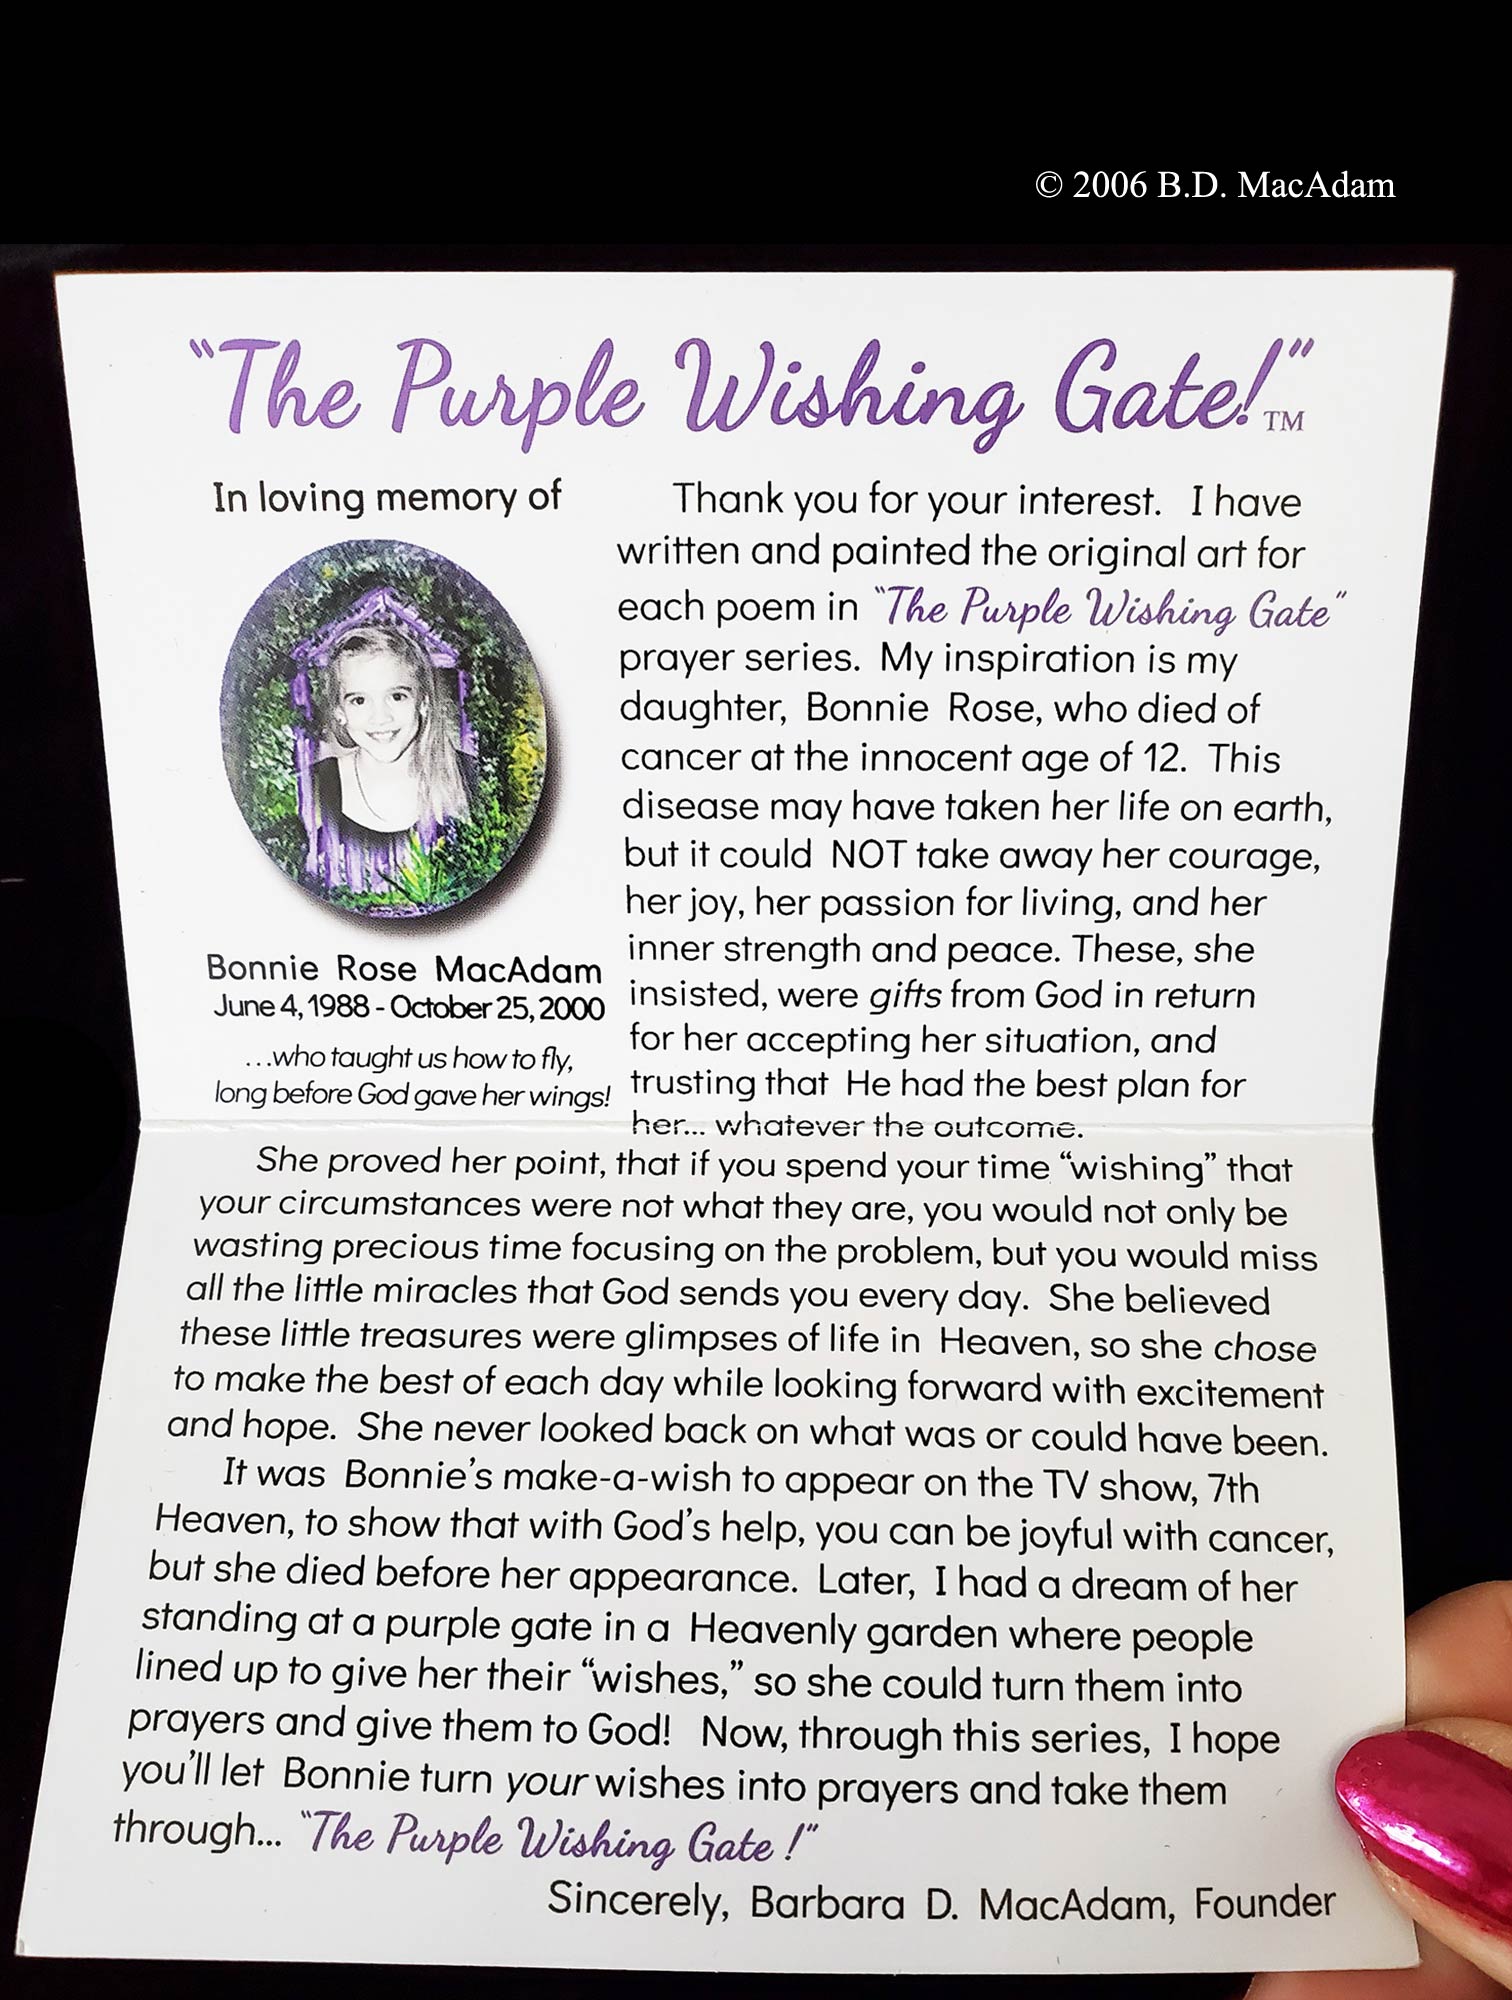 A Blessing for My Granddaughter - Pocket Blessing | PurpleWishingGate.com